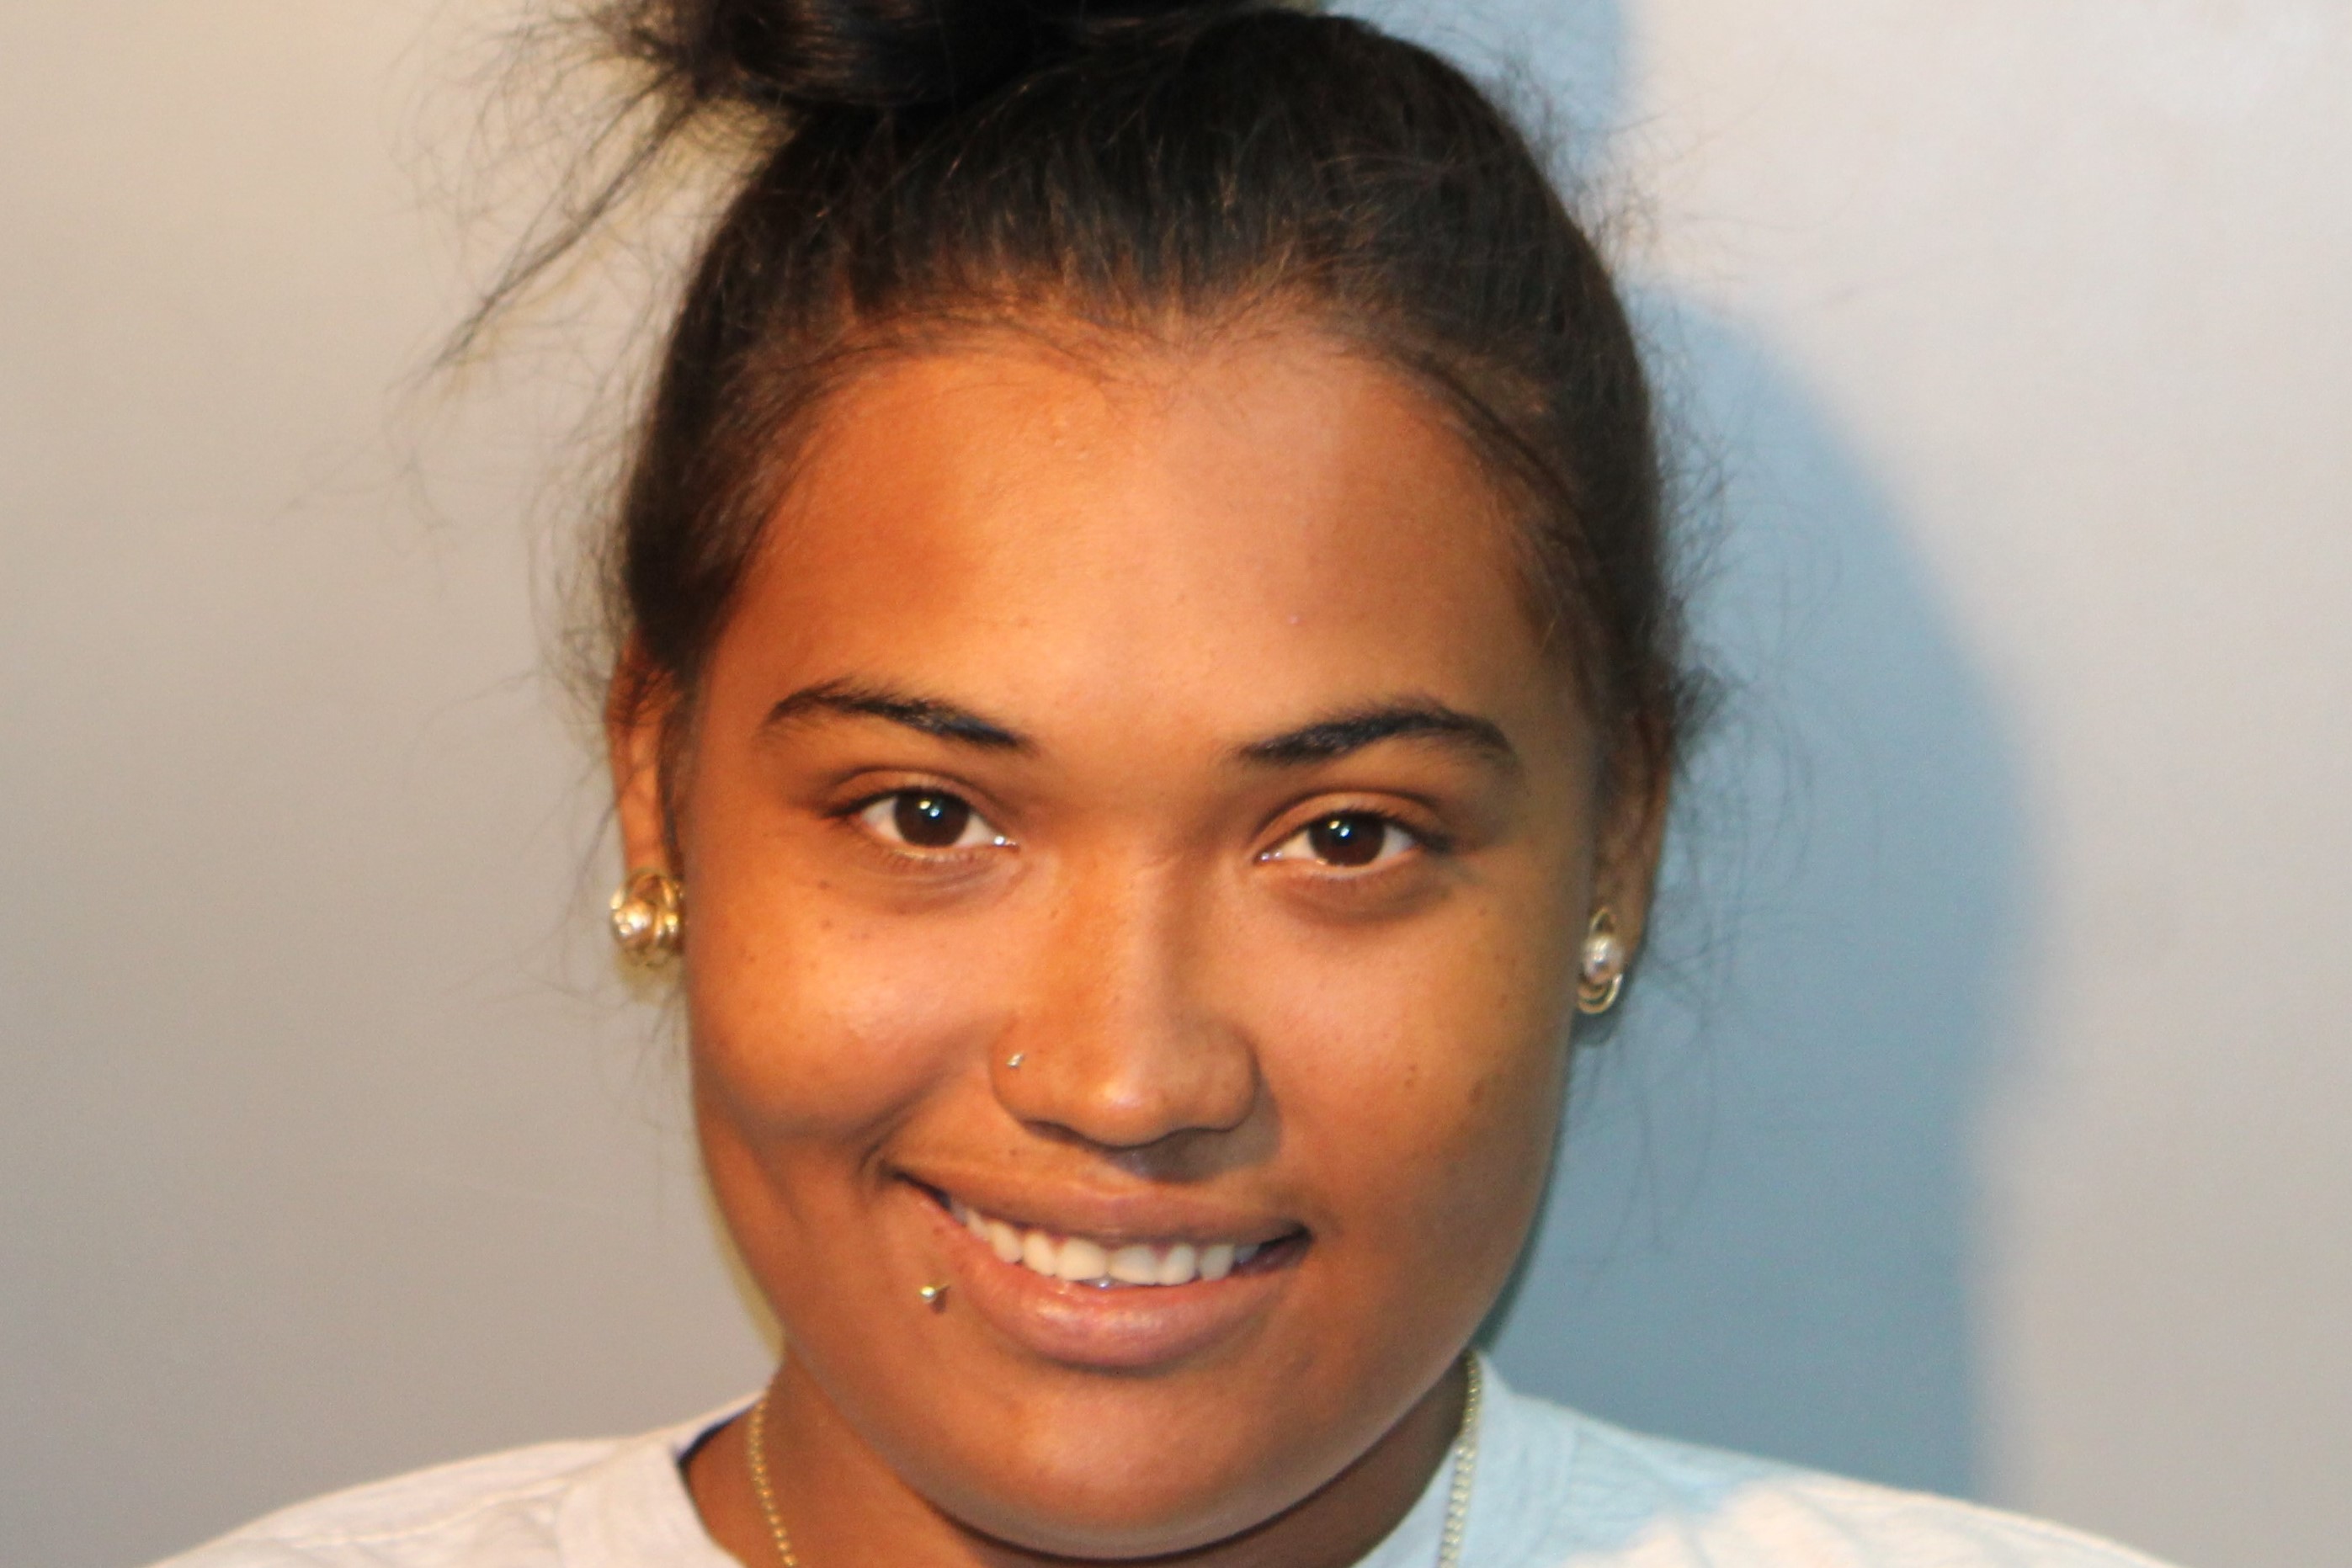 POLICE: St. Croix's Misaela Melendez Arrested For Second Slashing Attack in Two Years